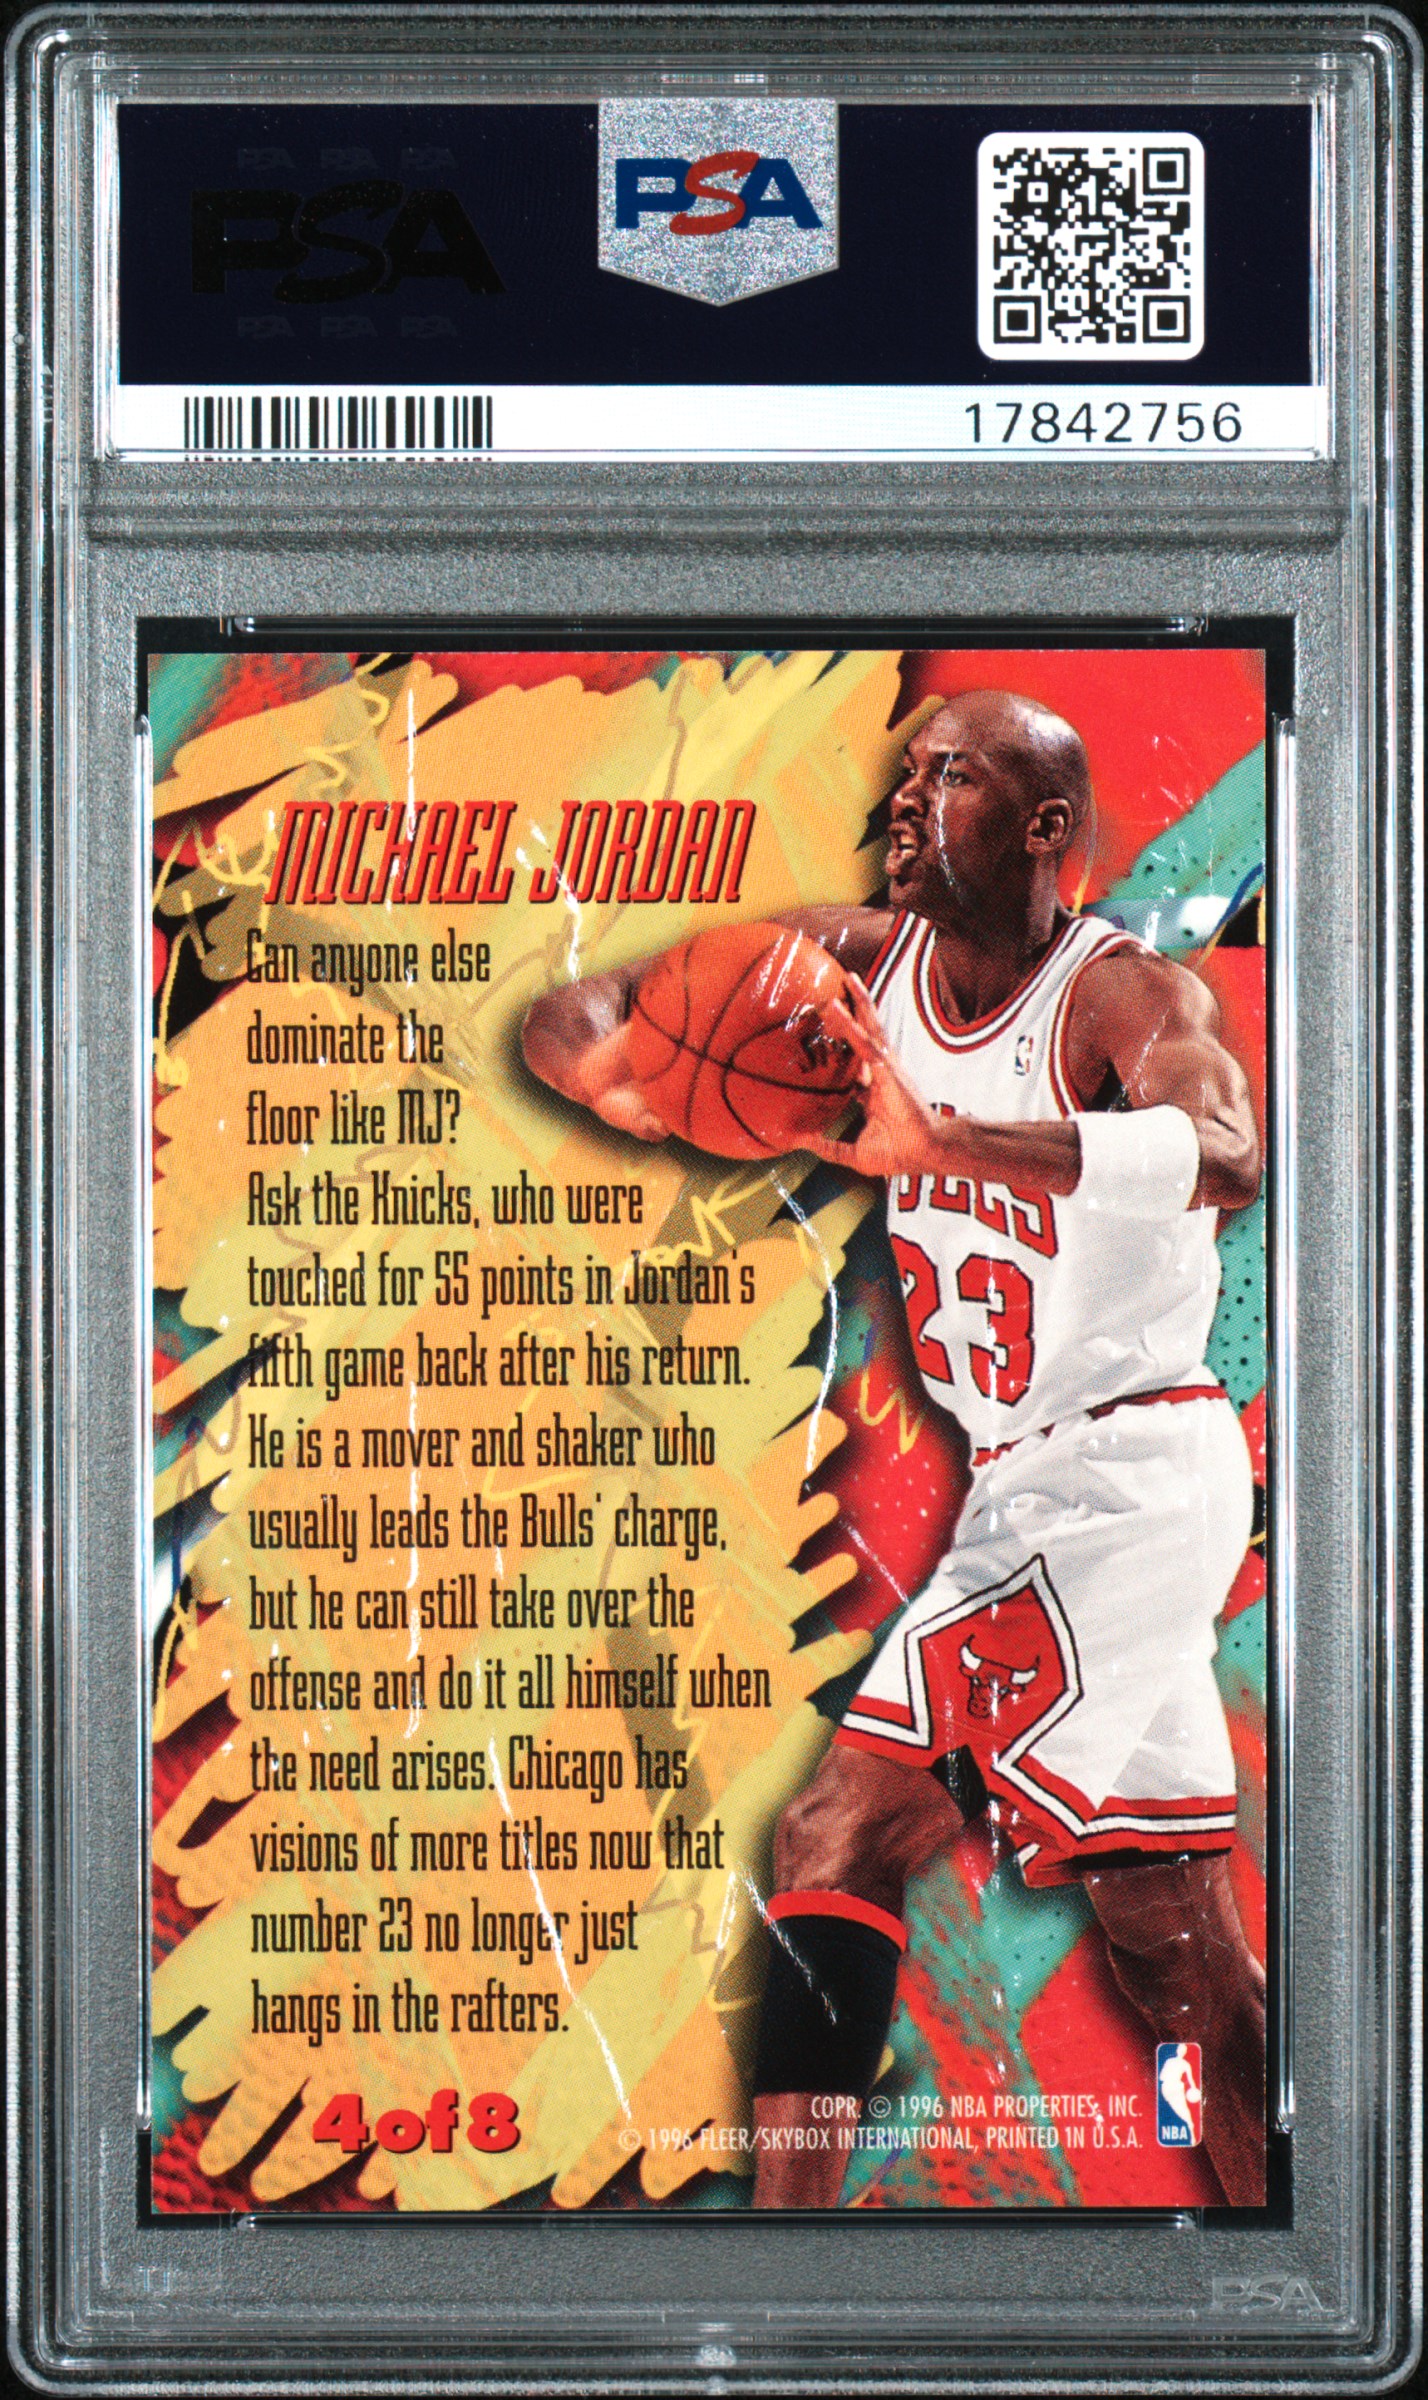 Michael Jordan - Michael - Image 4 from Living in the Rafters: Top